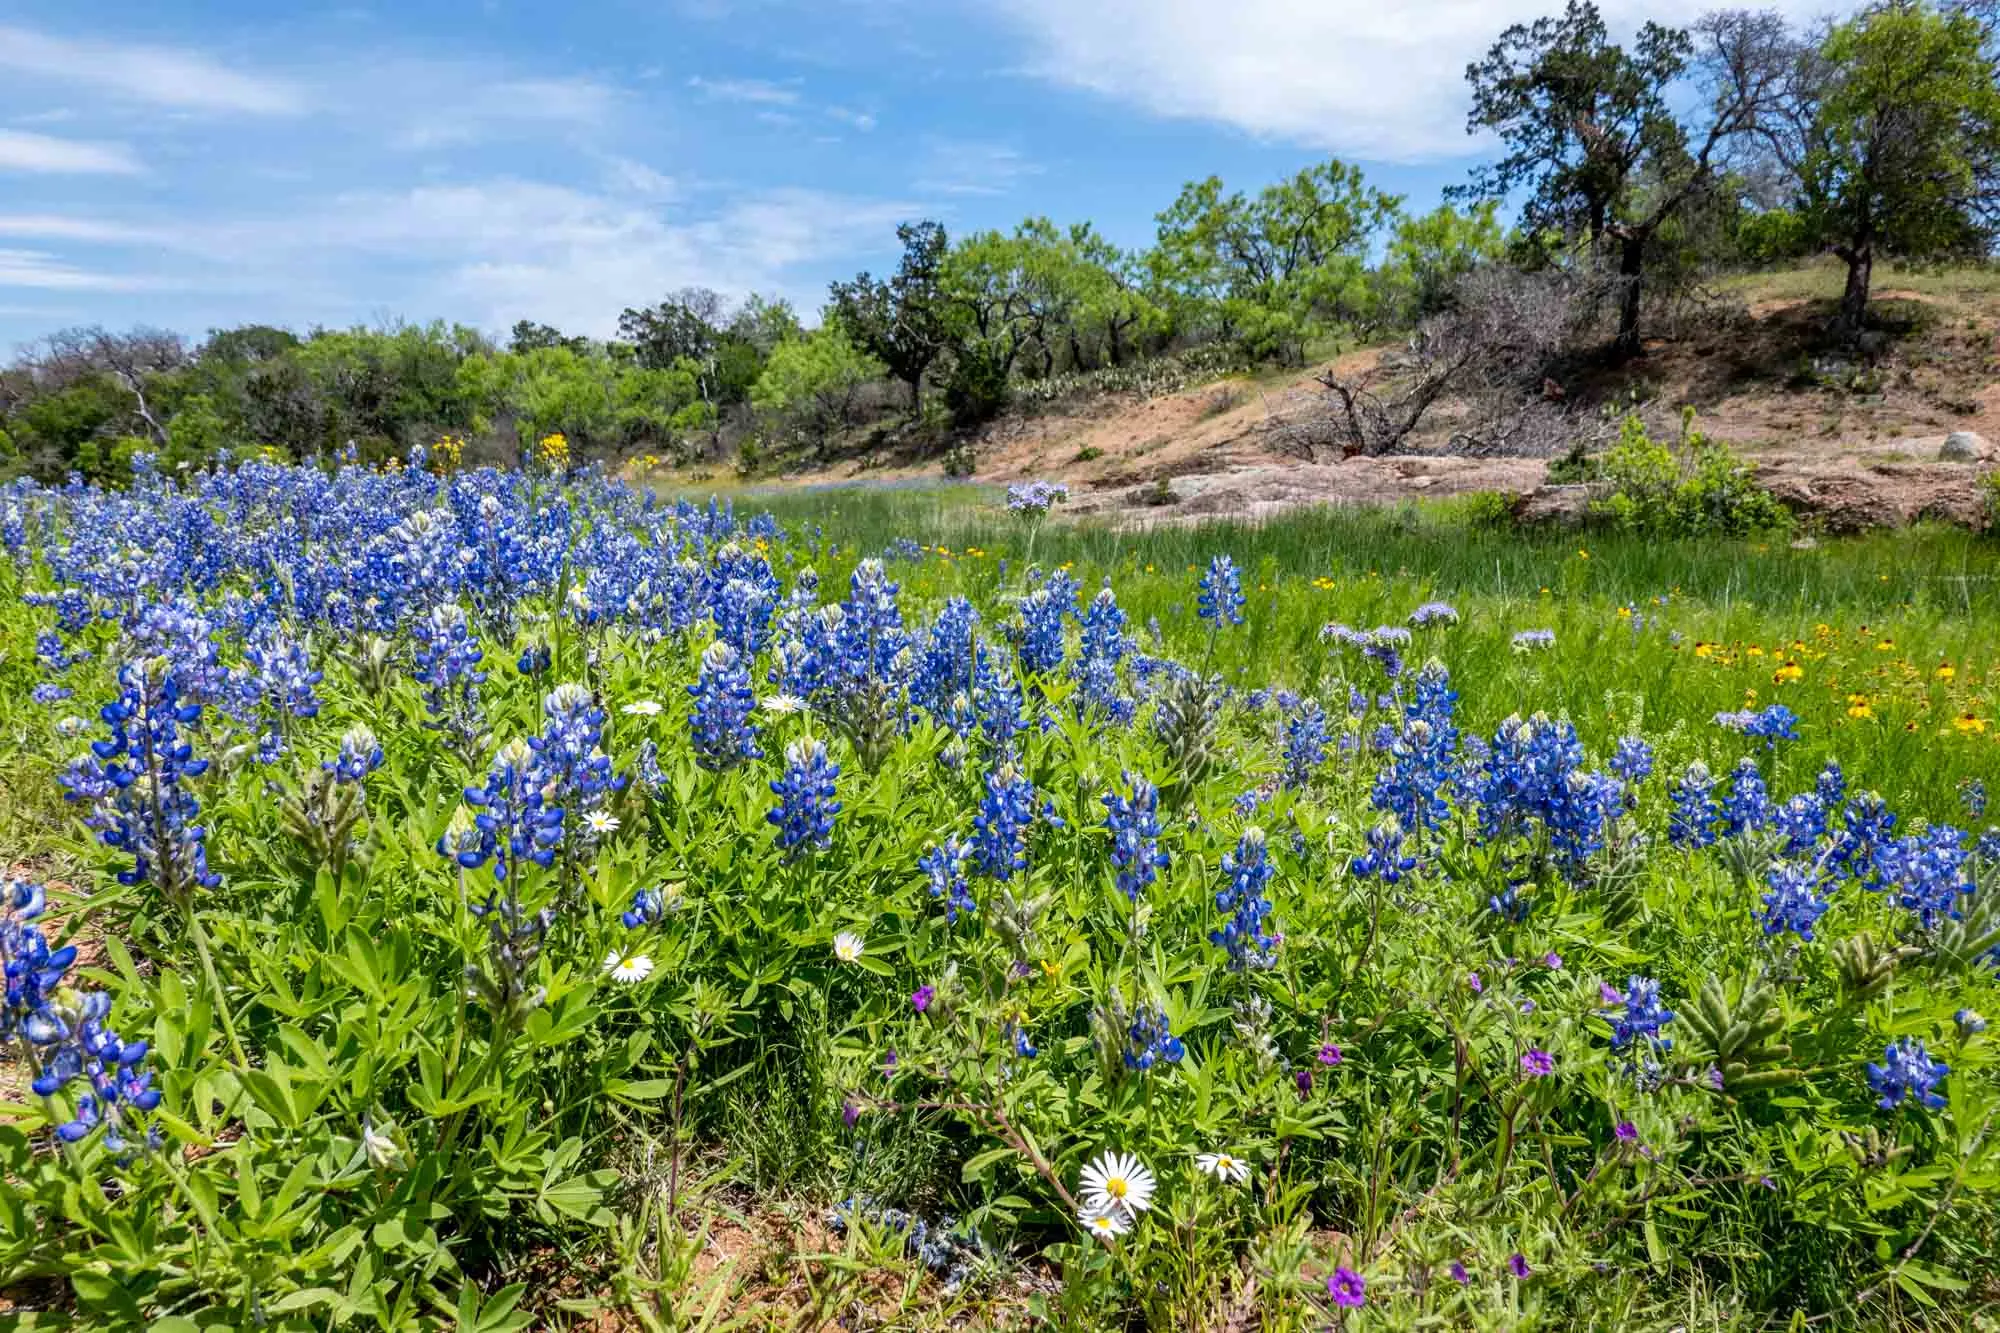 The Willow City Loop bluebonnets in bloom